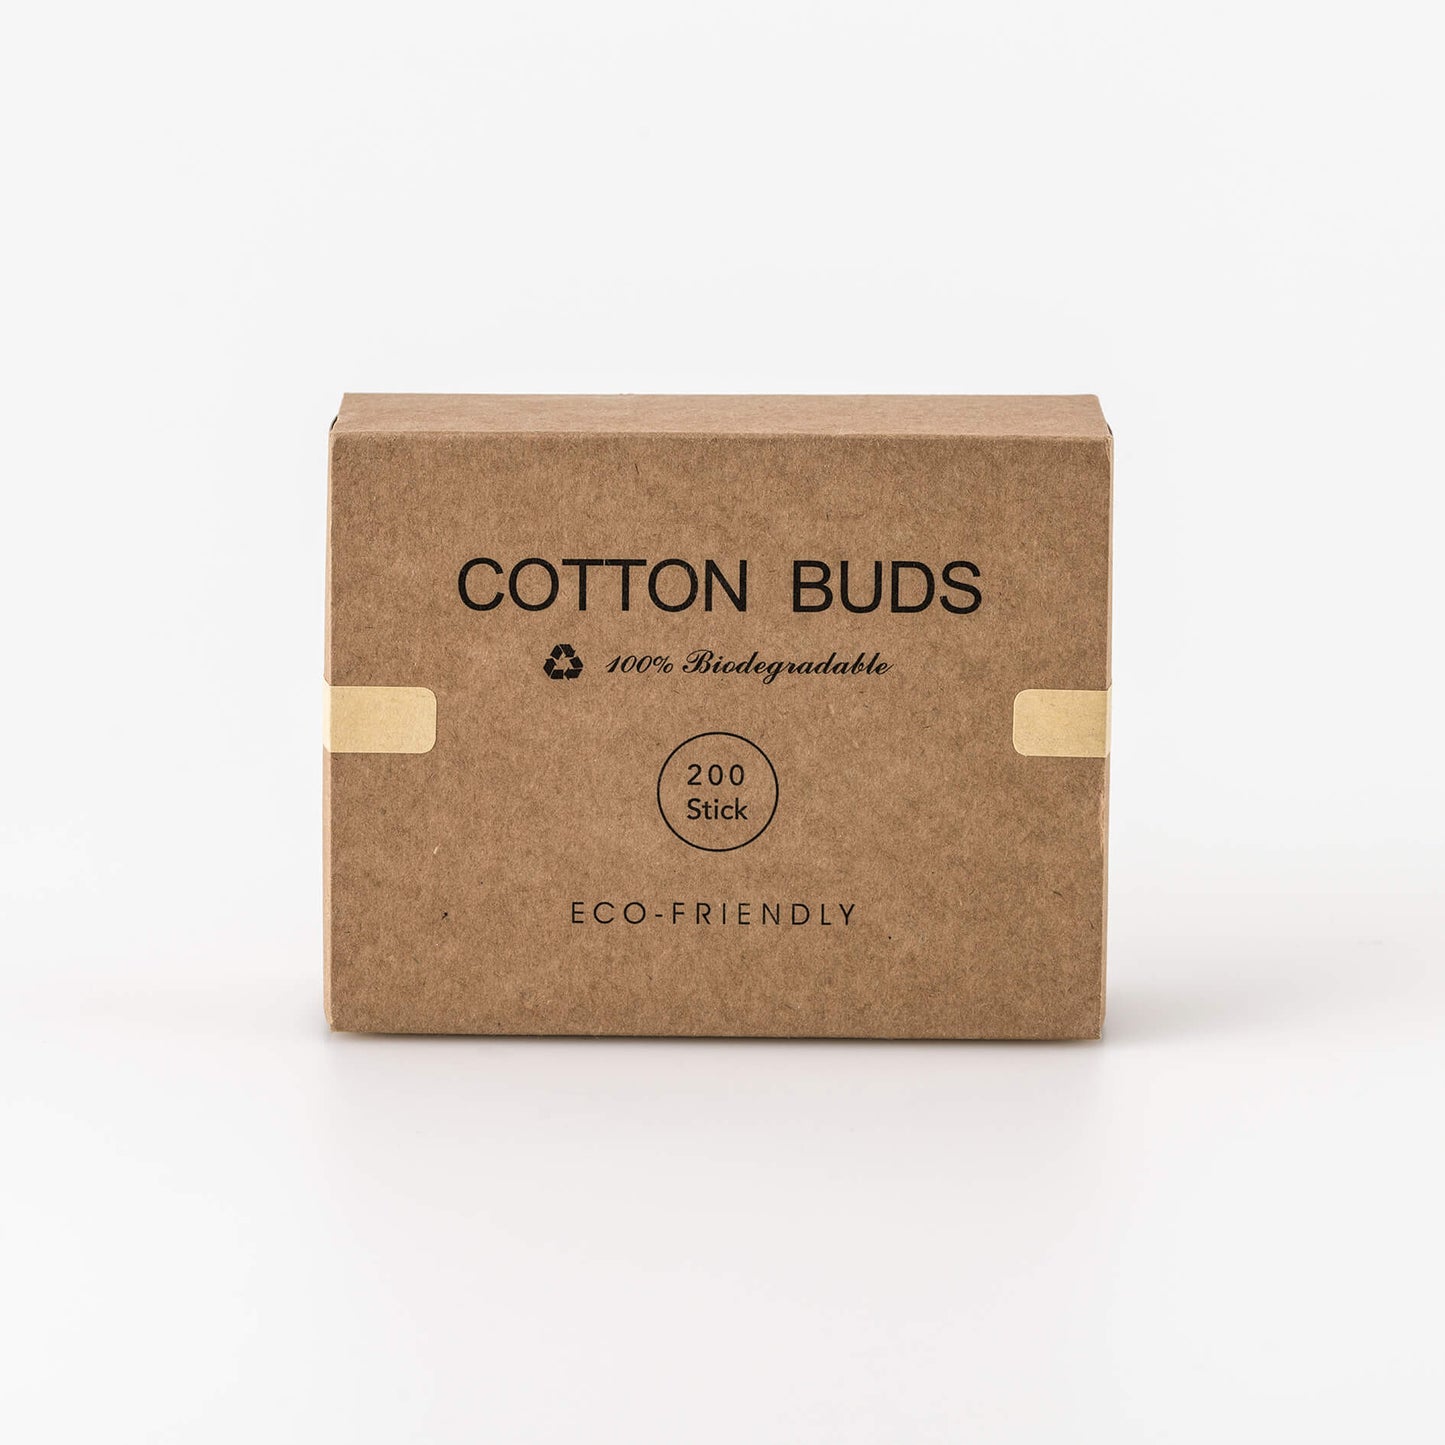 Eco-friendly cotton buds in a draw style box. 100% biodegradable and plastic free. 